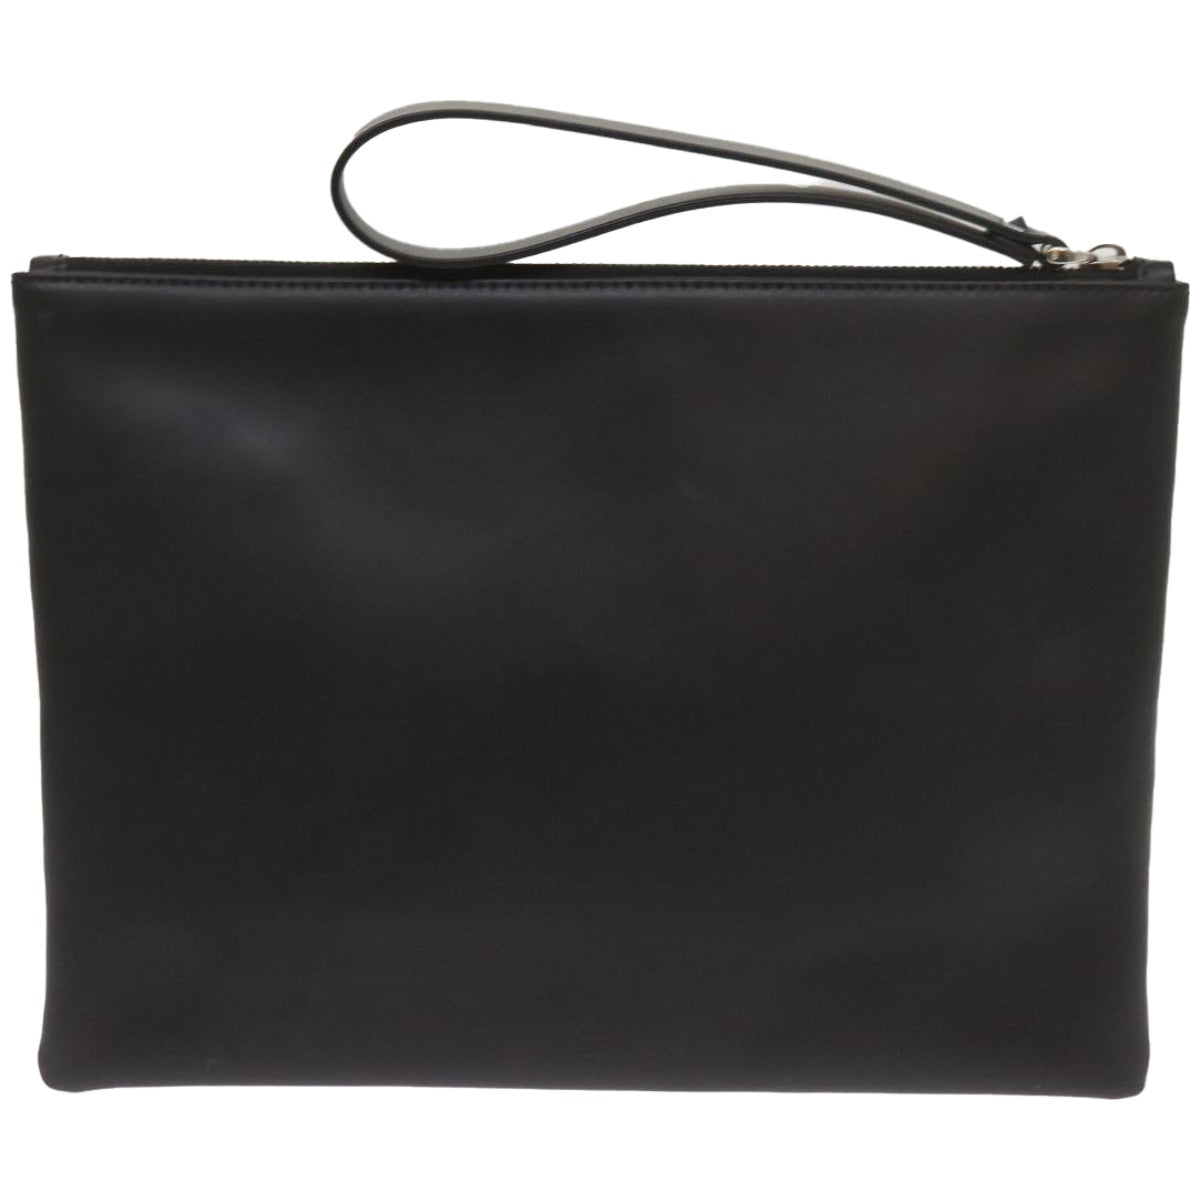 VALENTINO Clutch Bag Leather Black Auth ep3342 - 0